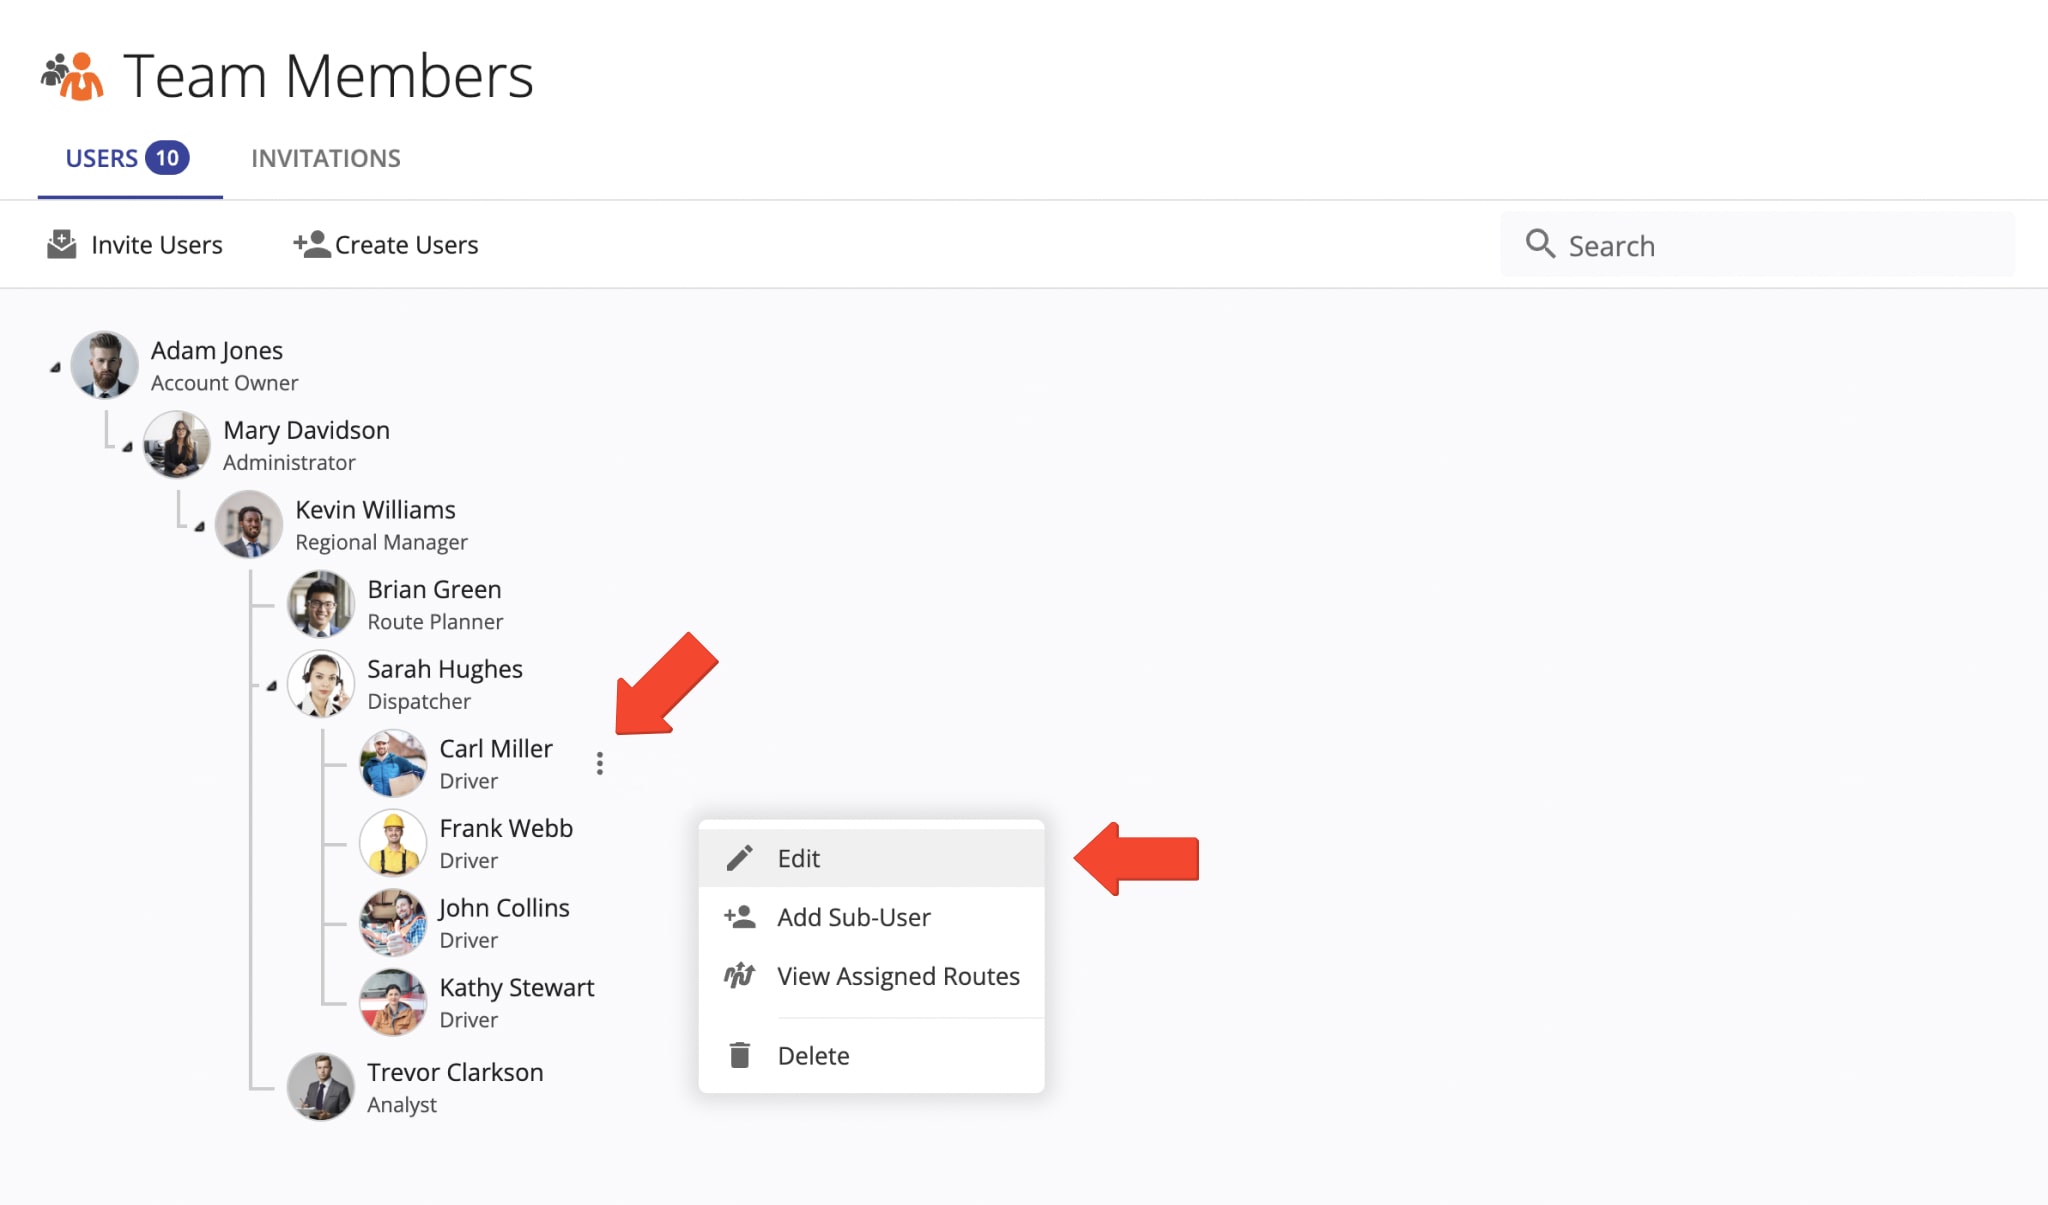 Edit an existing driver, route planner, manager, or another user to add Custom Data.